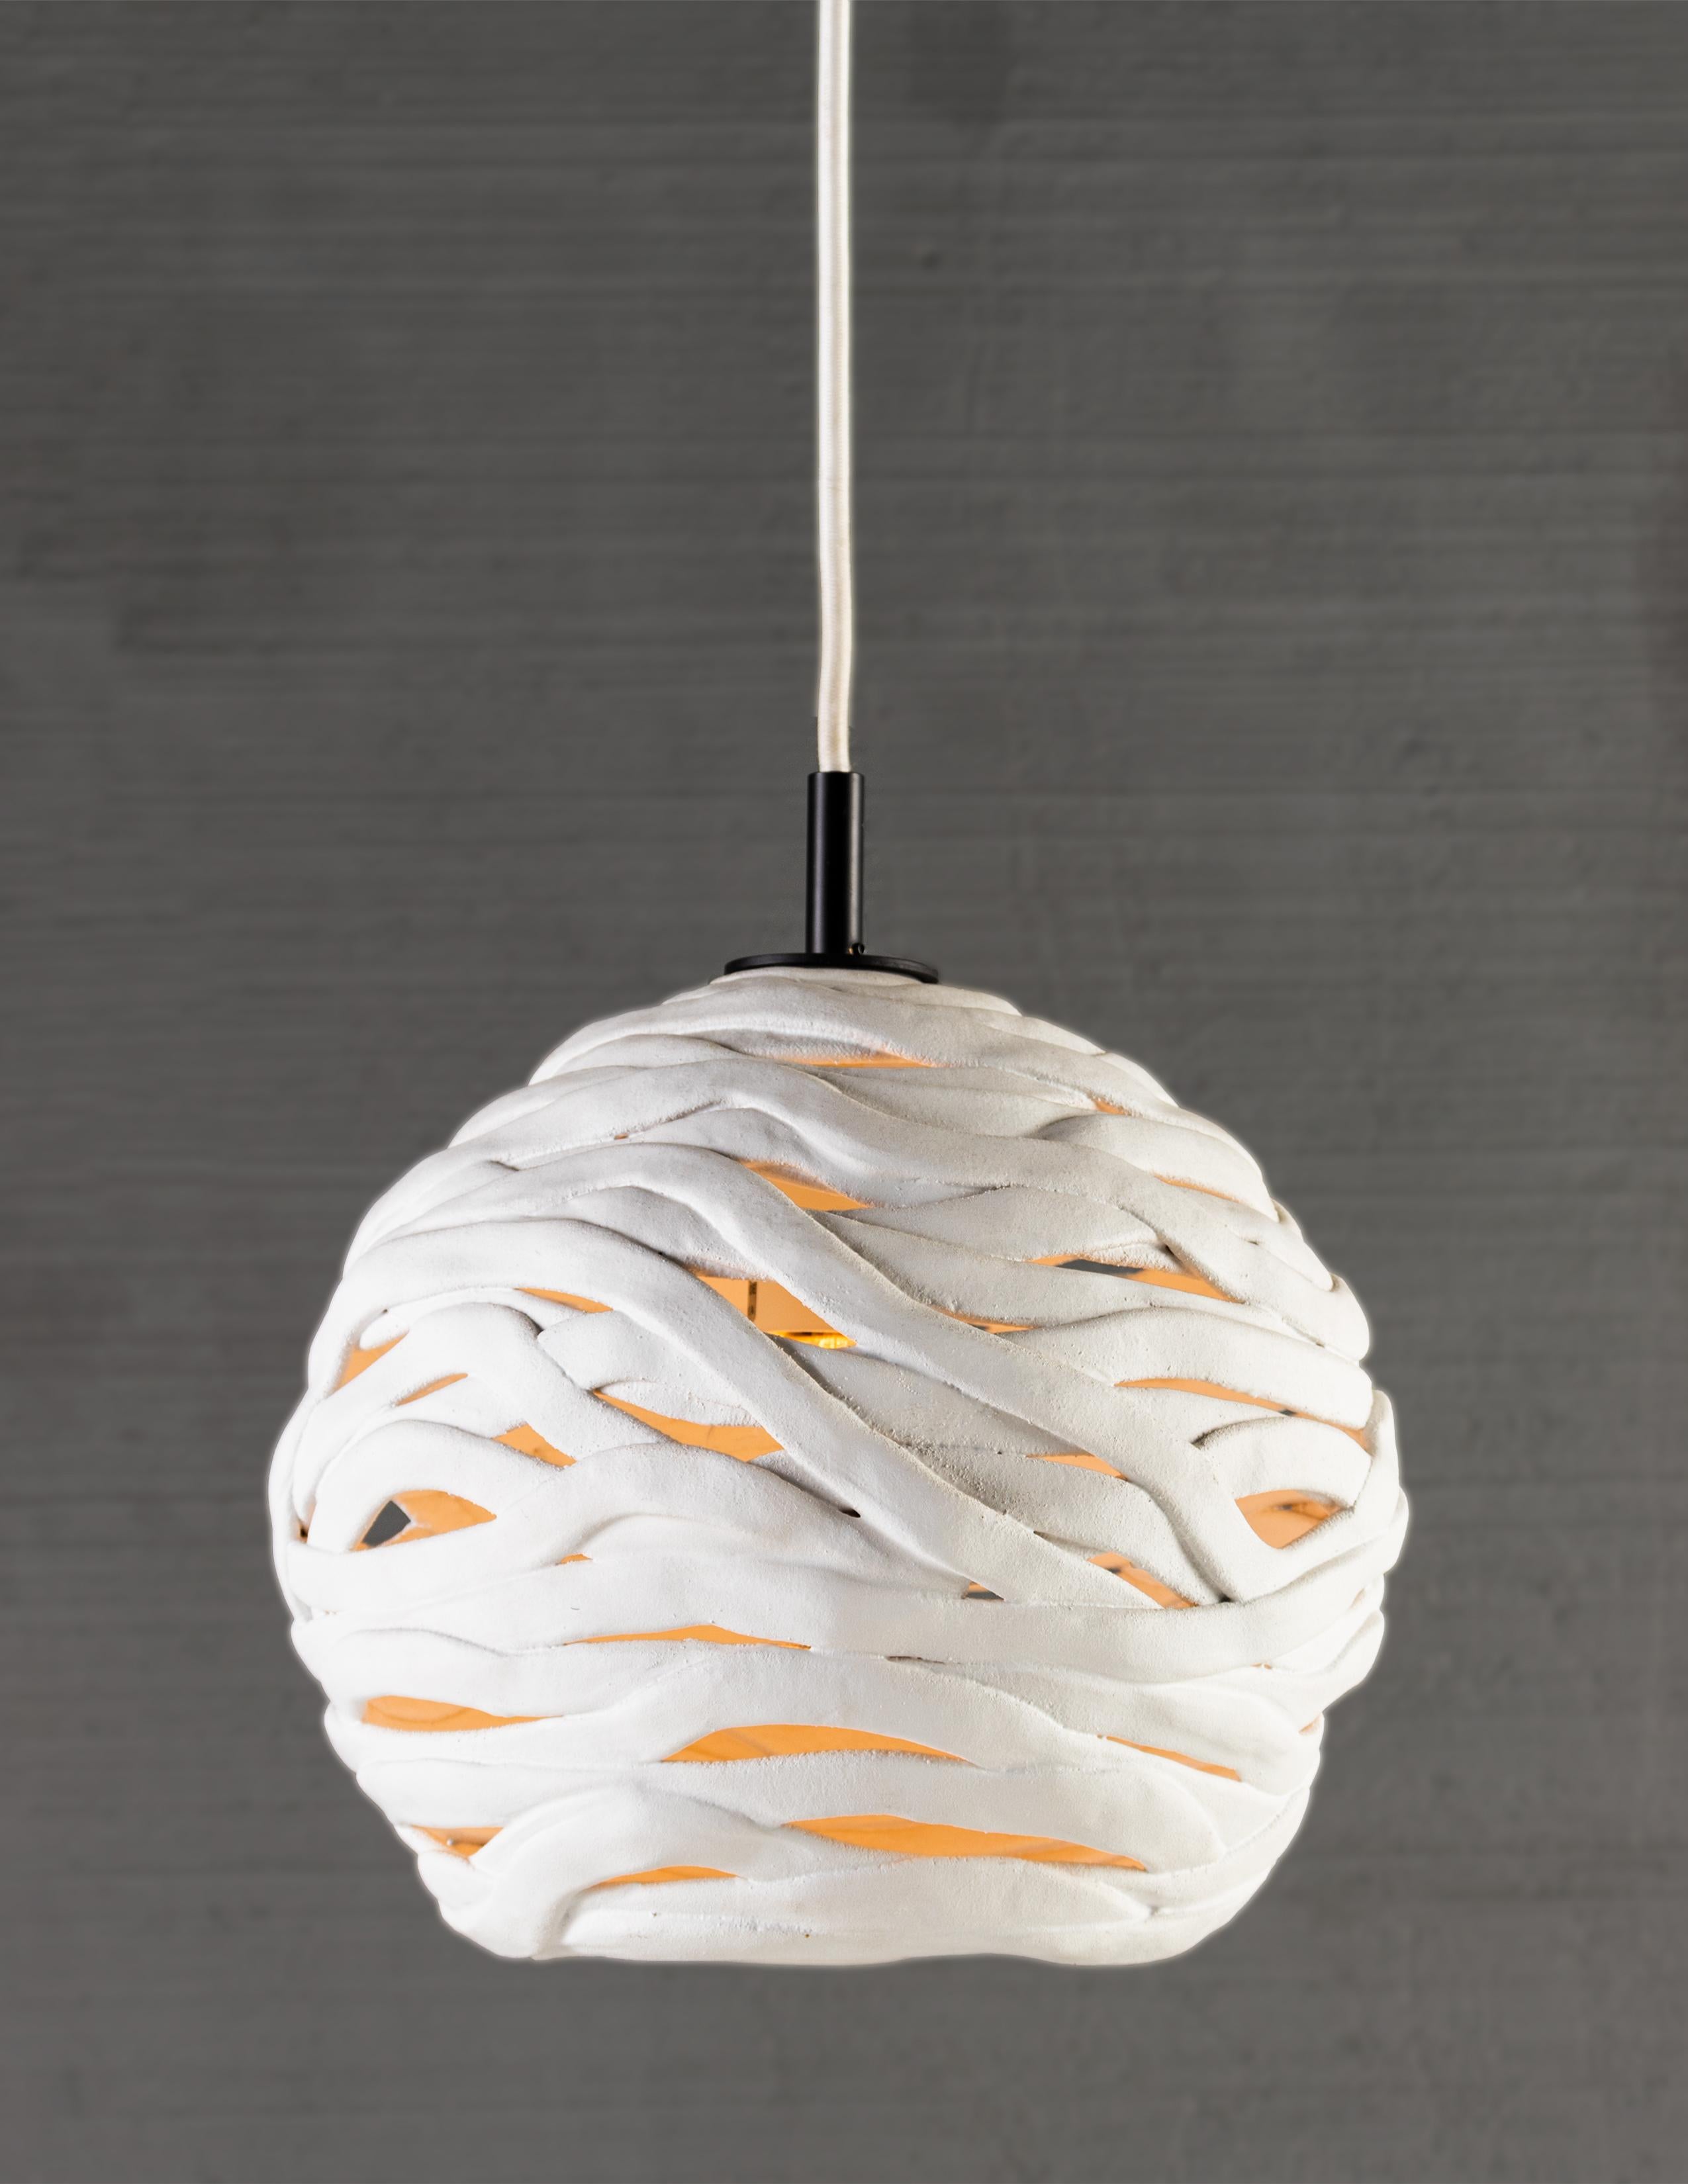 RENG, wrap, hand formed ceramic chandelier light.

The Wrap pendant is formed of individual hand formed strips of terra-cotta molded and set in place by hand. Wrap is more an artistic expression than a light fixture, a story of craft and patience in